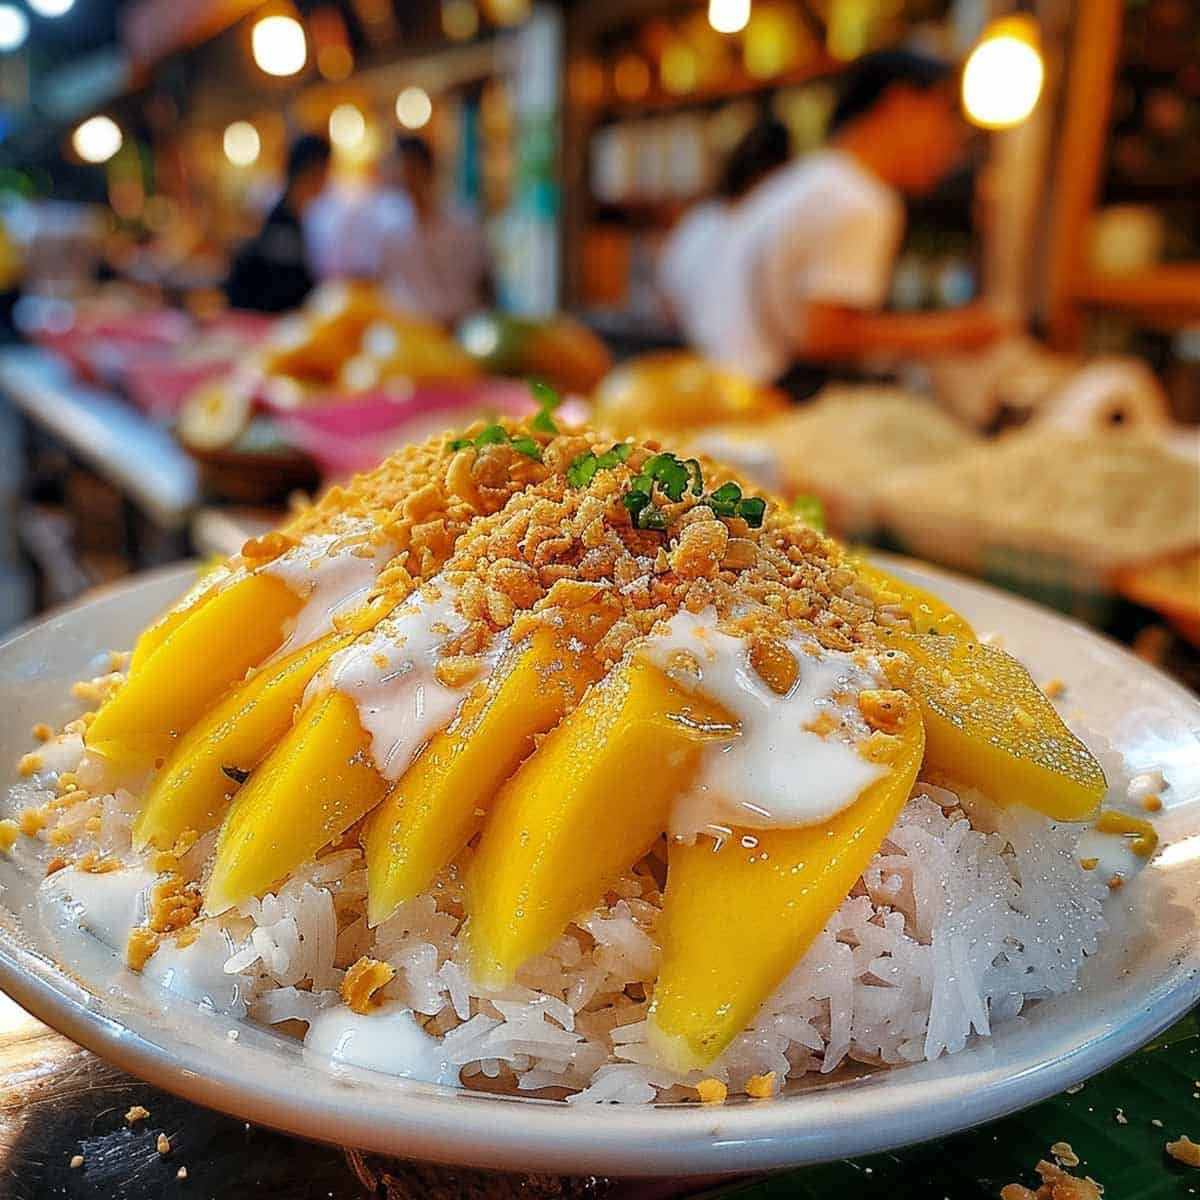 Mango Sticky Rice being served at a Thai market stall with colorful background